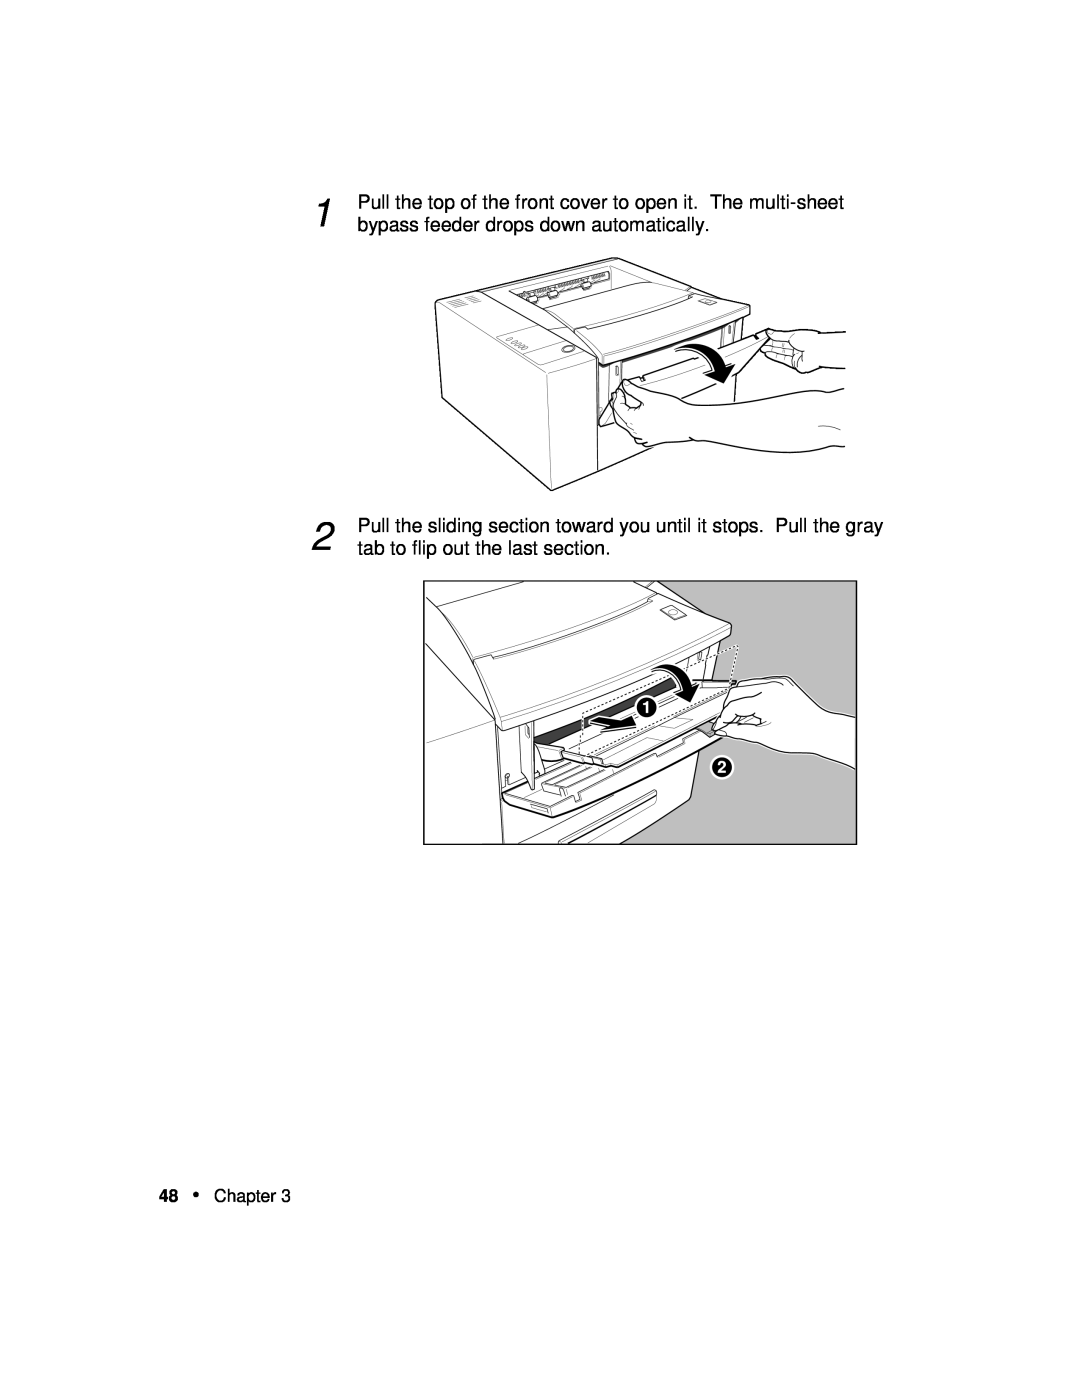 Xerox P12 Pull the top of the front cover to open it. The multi-sheet, bypass feeder drops down automatically, Chapter 